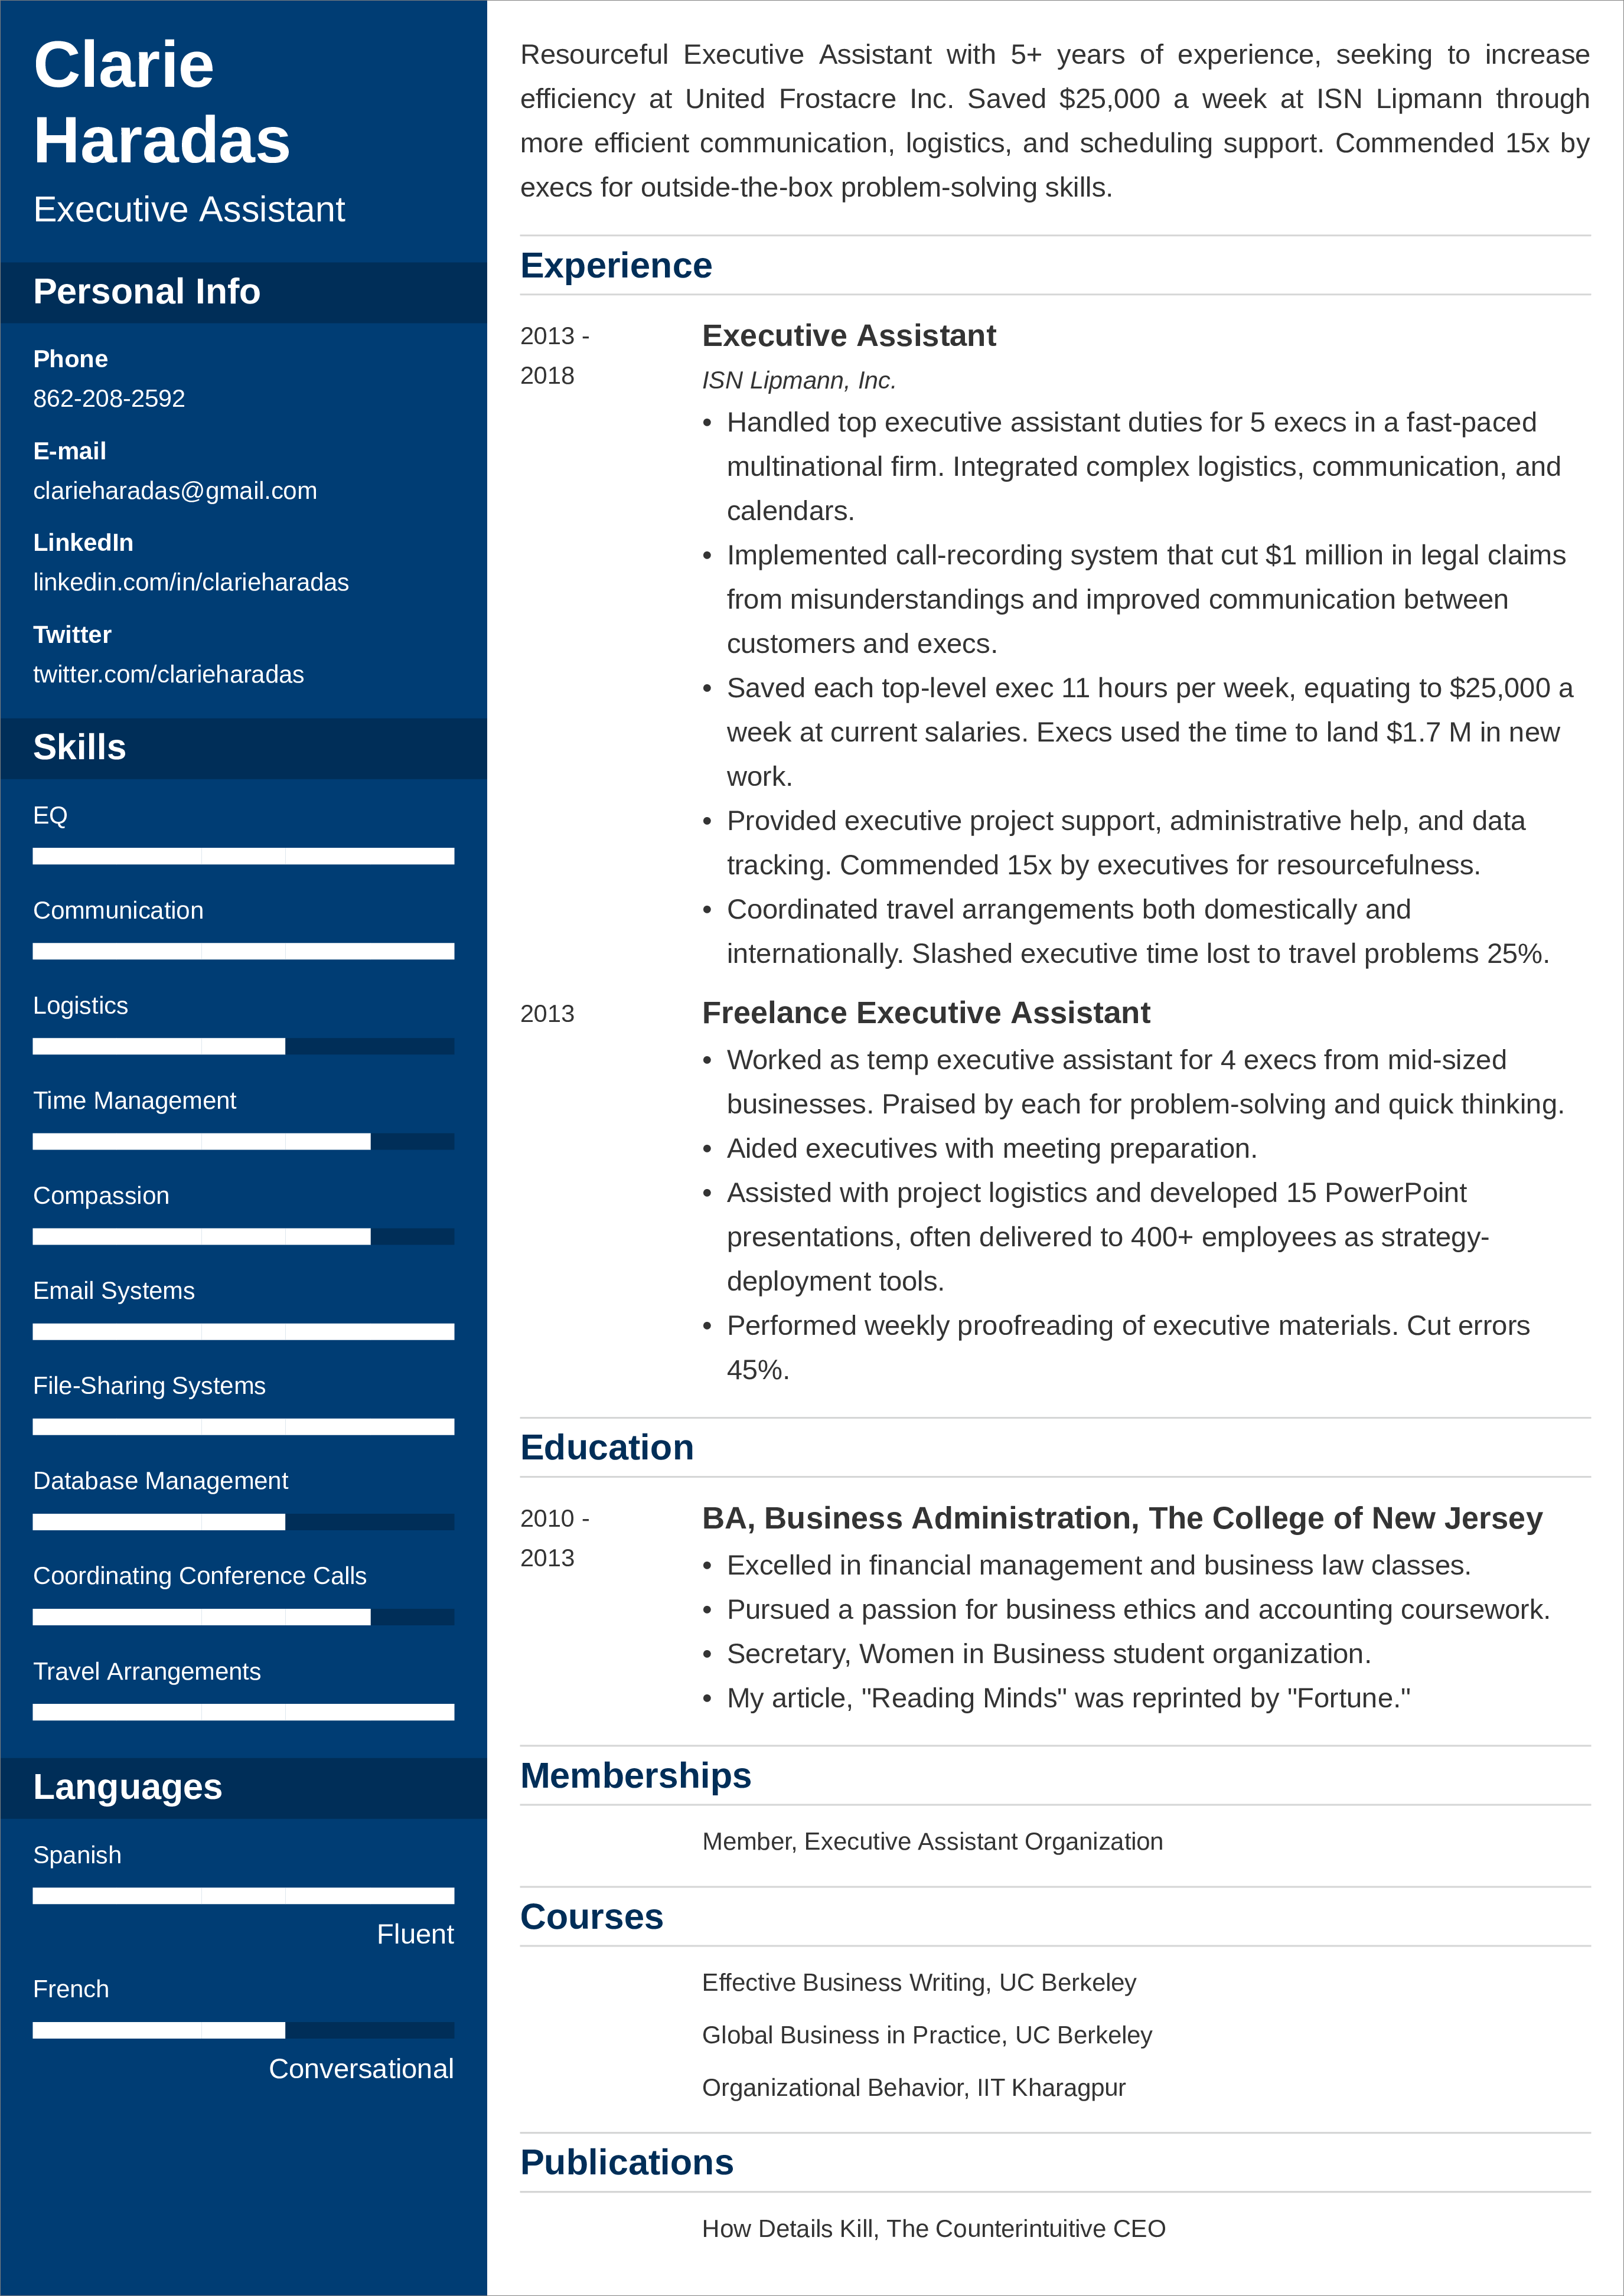 25+ Professional Resume Summary Examples (+How-to Guide)